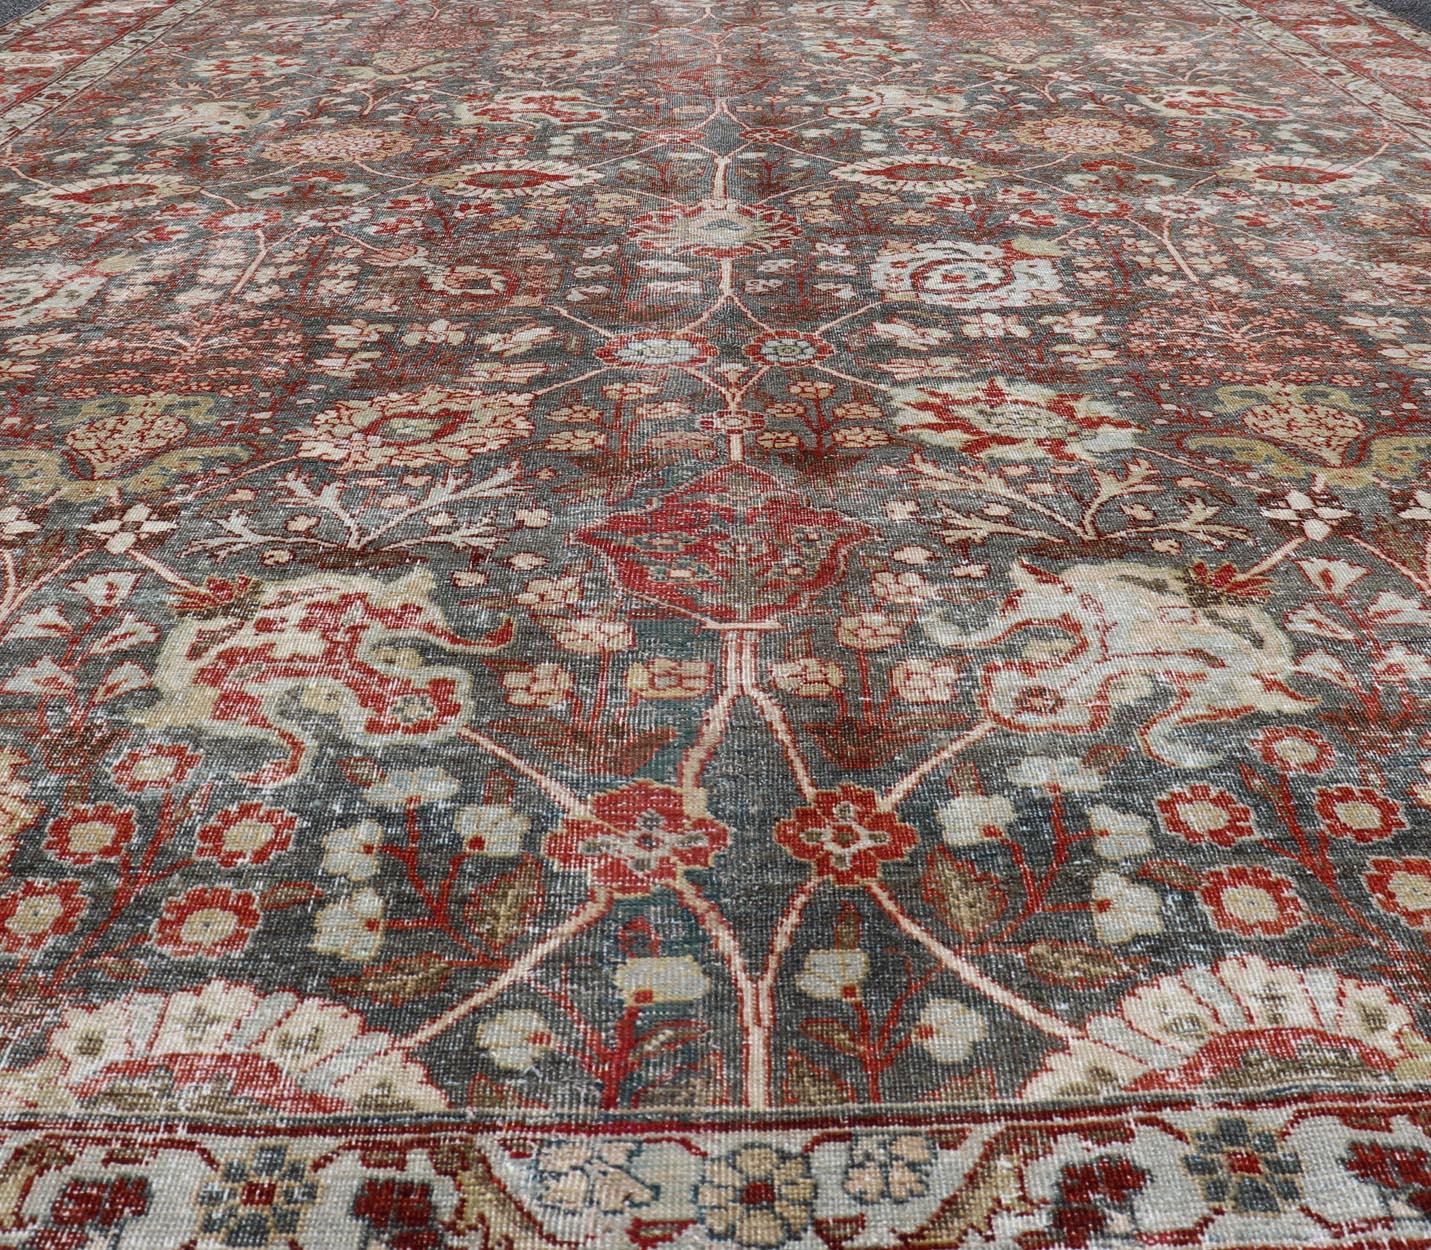 Antique Tabriz with All-Over Floral Sub-Geometric Design In Charcoal and Red. Antique Floral Tabriz, Keivan Woven Arts / rug EMB-22102-15103, country of origin / type: Persian / Tabriz, circa Early-20th Century.
Measures: 8'0 x 11'6
This stunning